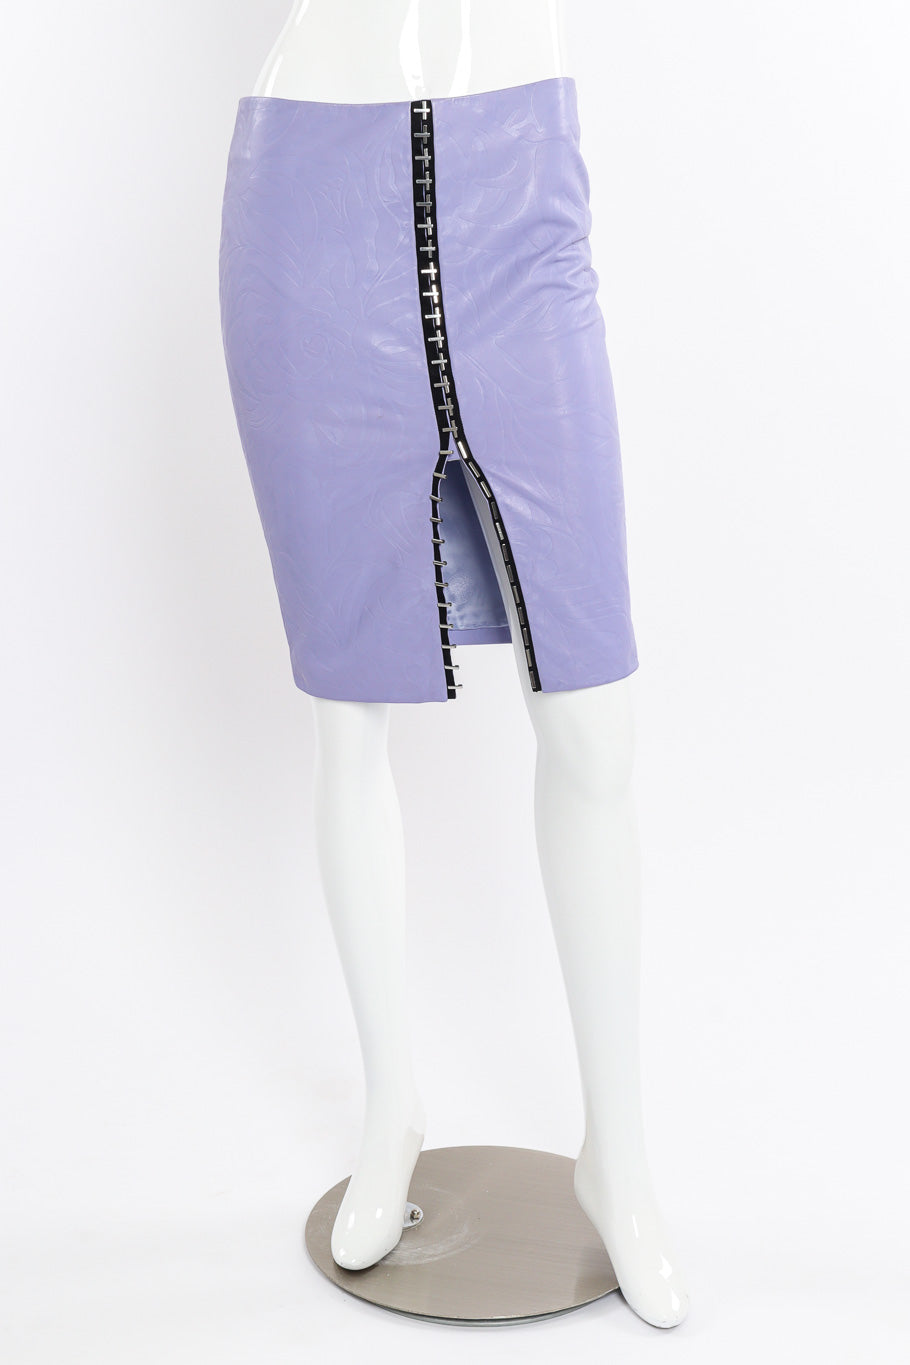 Versace Embossed Leather Pencil Skirt front view on mannequin @Recessla